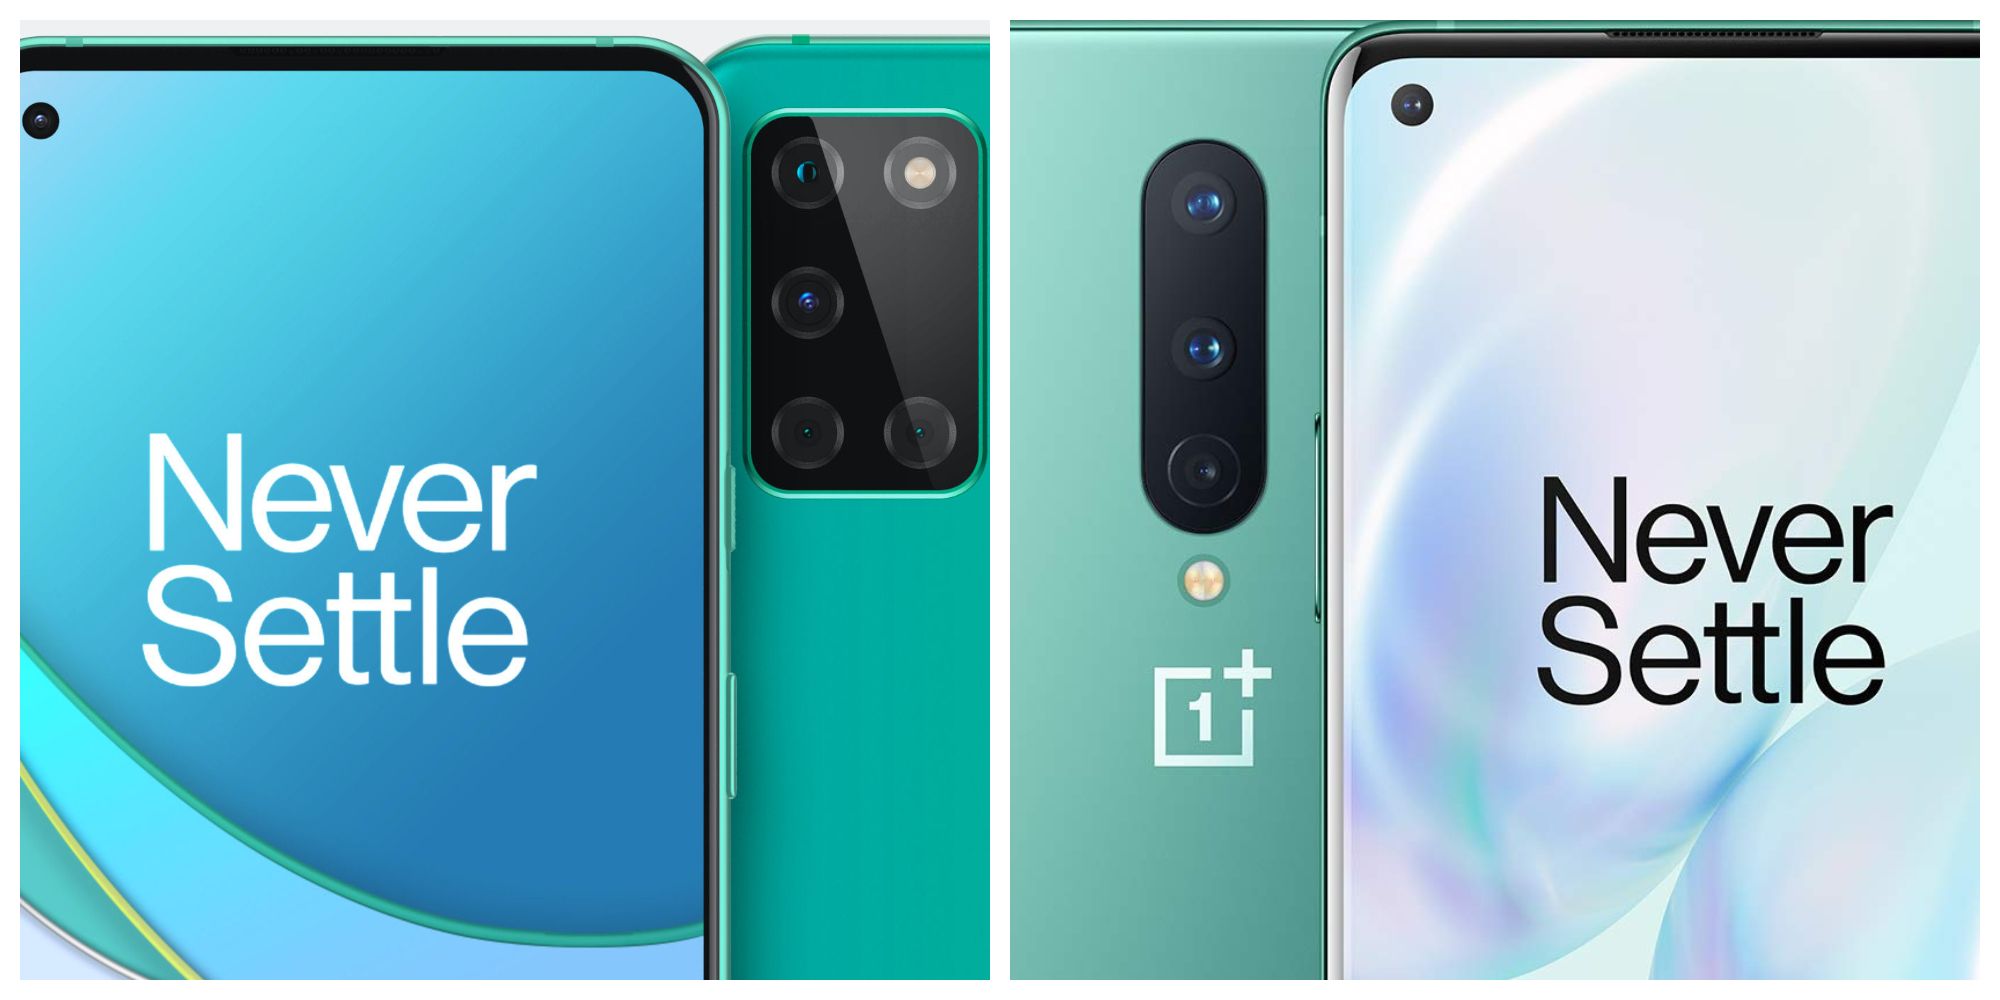 OnePlus 8T Vs OnePlus 8 Whats New & Different Explained